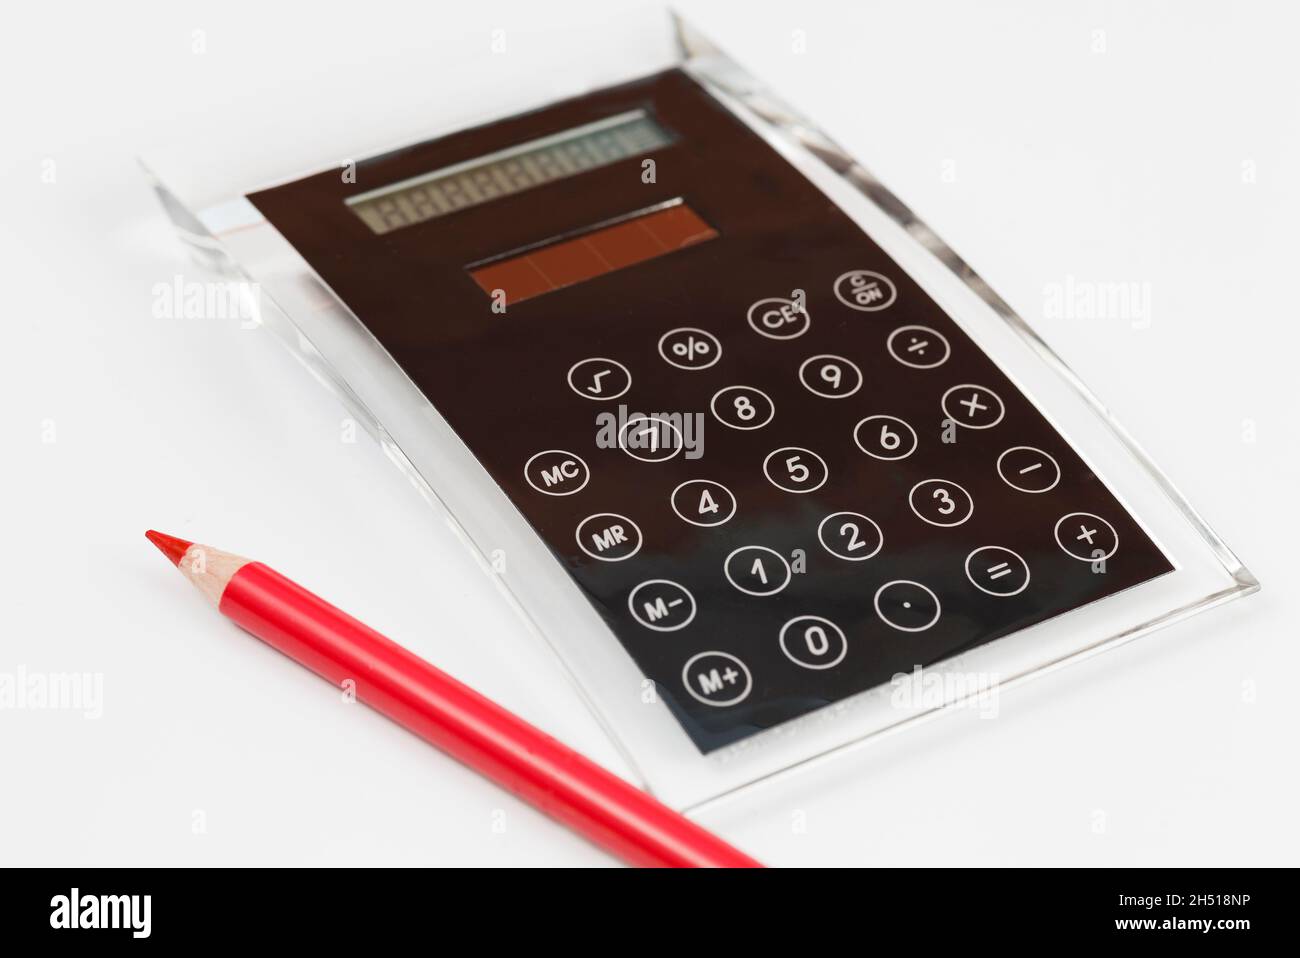 Black design calculator made of acrylic glass with integrated keyboard and red pen Stock Photo